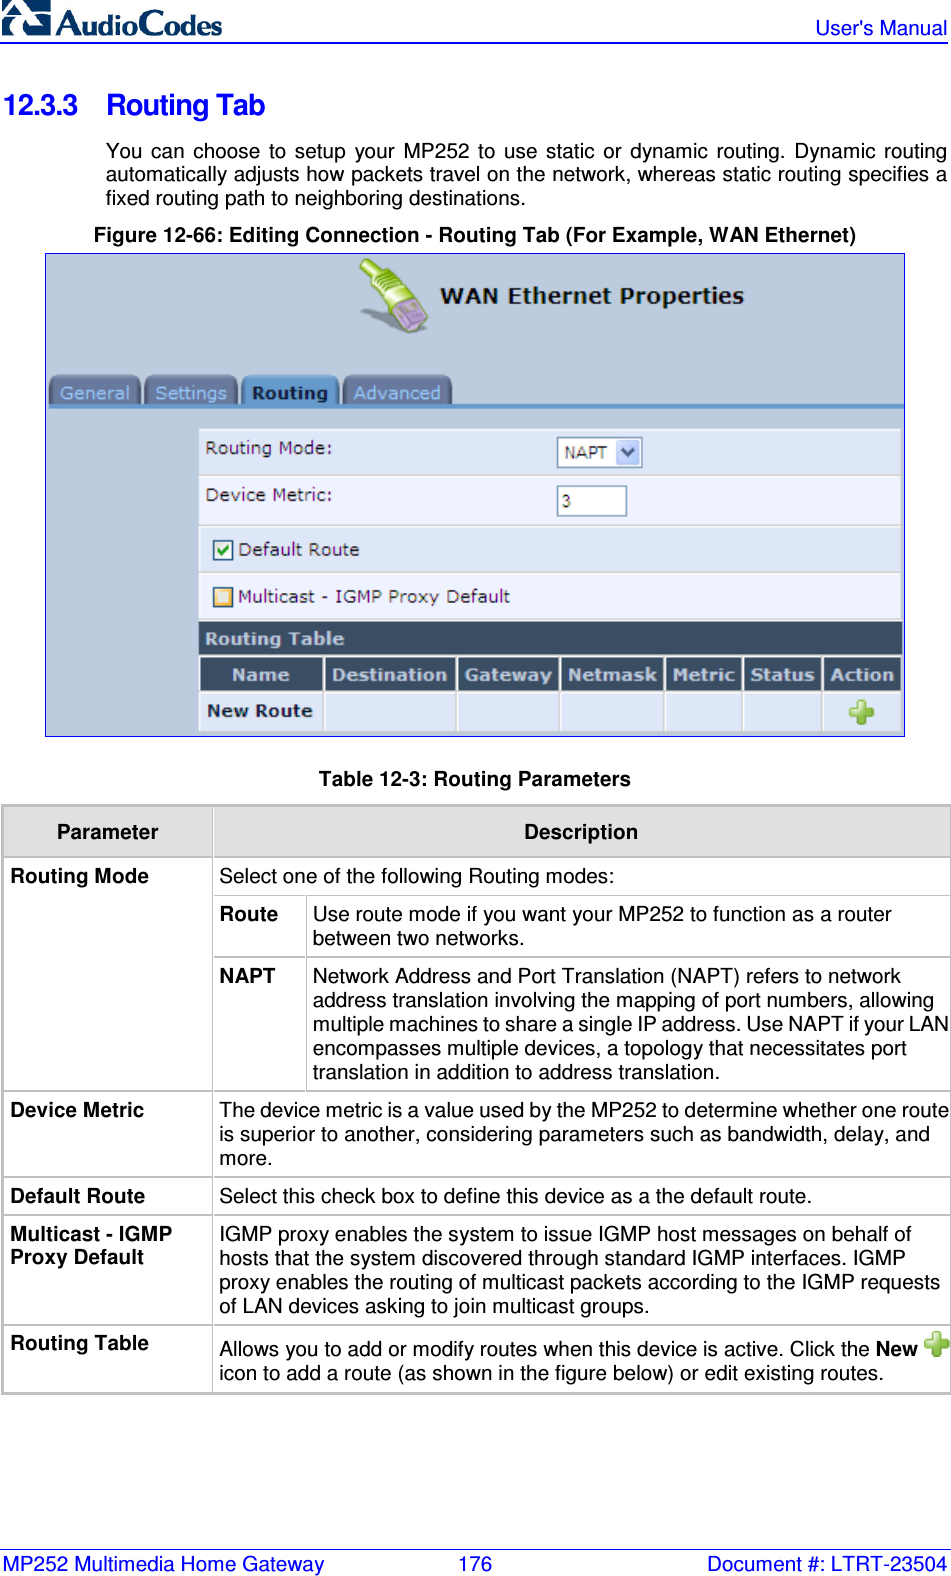 MP252 Multimedia Home Gateway  176  Document #: LTRT-23504   User&apos;s Manual  12.3.3  Routing Tab You  can  choose  to  setup  your  MP252  to  use  static  or  dynamic  routing.  Dynamic  routing automatically adjusts how packets travel on the network, whereas static routing specifies a fixed routing path to neighboring destinations. Figure 12-66: Editing Connection - Routing Tab (For Example, WAN Ethernet)  Table 12-3: Routing Parameters Parameter  Description Select one of the following Routing modes: Route  Use route mode if you want your MP252 to function as a router between two networks. Routing Mode NAPT  Network Address and Port Translation (NAPT) refers to network address translation involving the mapping of port numbers, allowing multiple machines to share a single IP address. Use NAPT if your LAN encompasses multiple devices, a topology that necessitates port translation in addition to address translation. Device Metric The device metric is a value used by the MP252 to determine whether one route is superior to another, considering parameters such as bandwidth, delay, and more. Default Route  Select this check box to define this device as a the default route. Multicast - IGMP Proxy Default IGMP proxy enables the system to issue IGMP host messages on behalf of hosts that the system discovered through standard IGMP interfaces. IGMP proxy enables the routing of multicast packets according to the IGMP requests of LAN devices asking to join multicast groups. Routing Table  Allows you to add or modify routes when this device is active. Click the New icon to add a route (as shown in the figure below) or edit existing routes.   